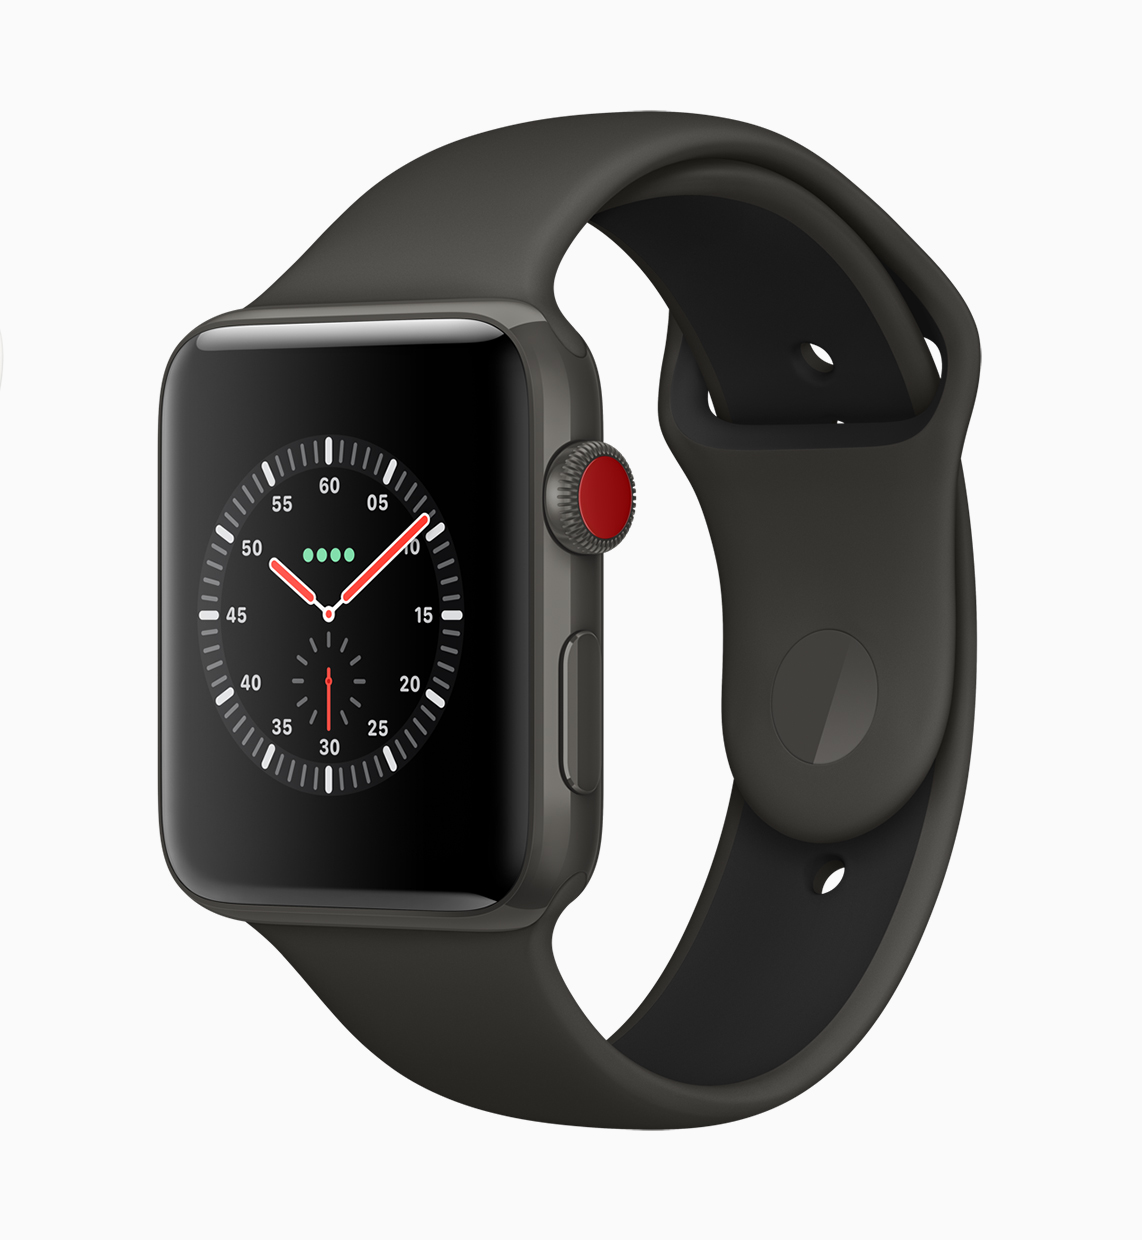 Apple Introduces Apple Watch Series 3 With Cellular